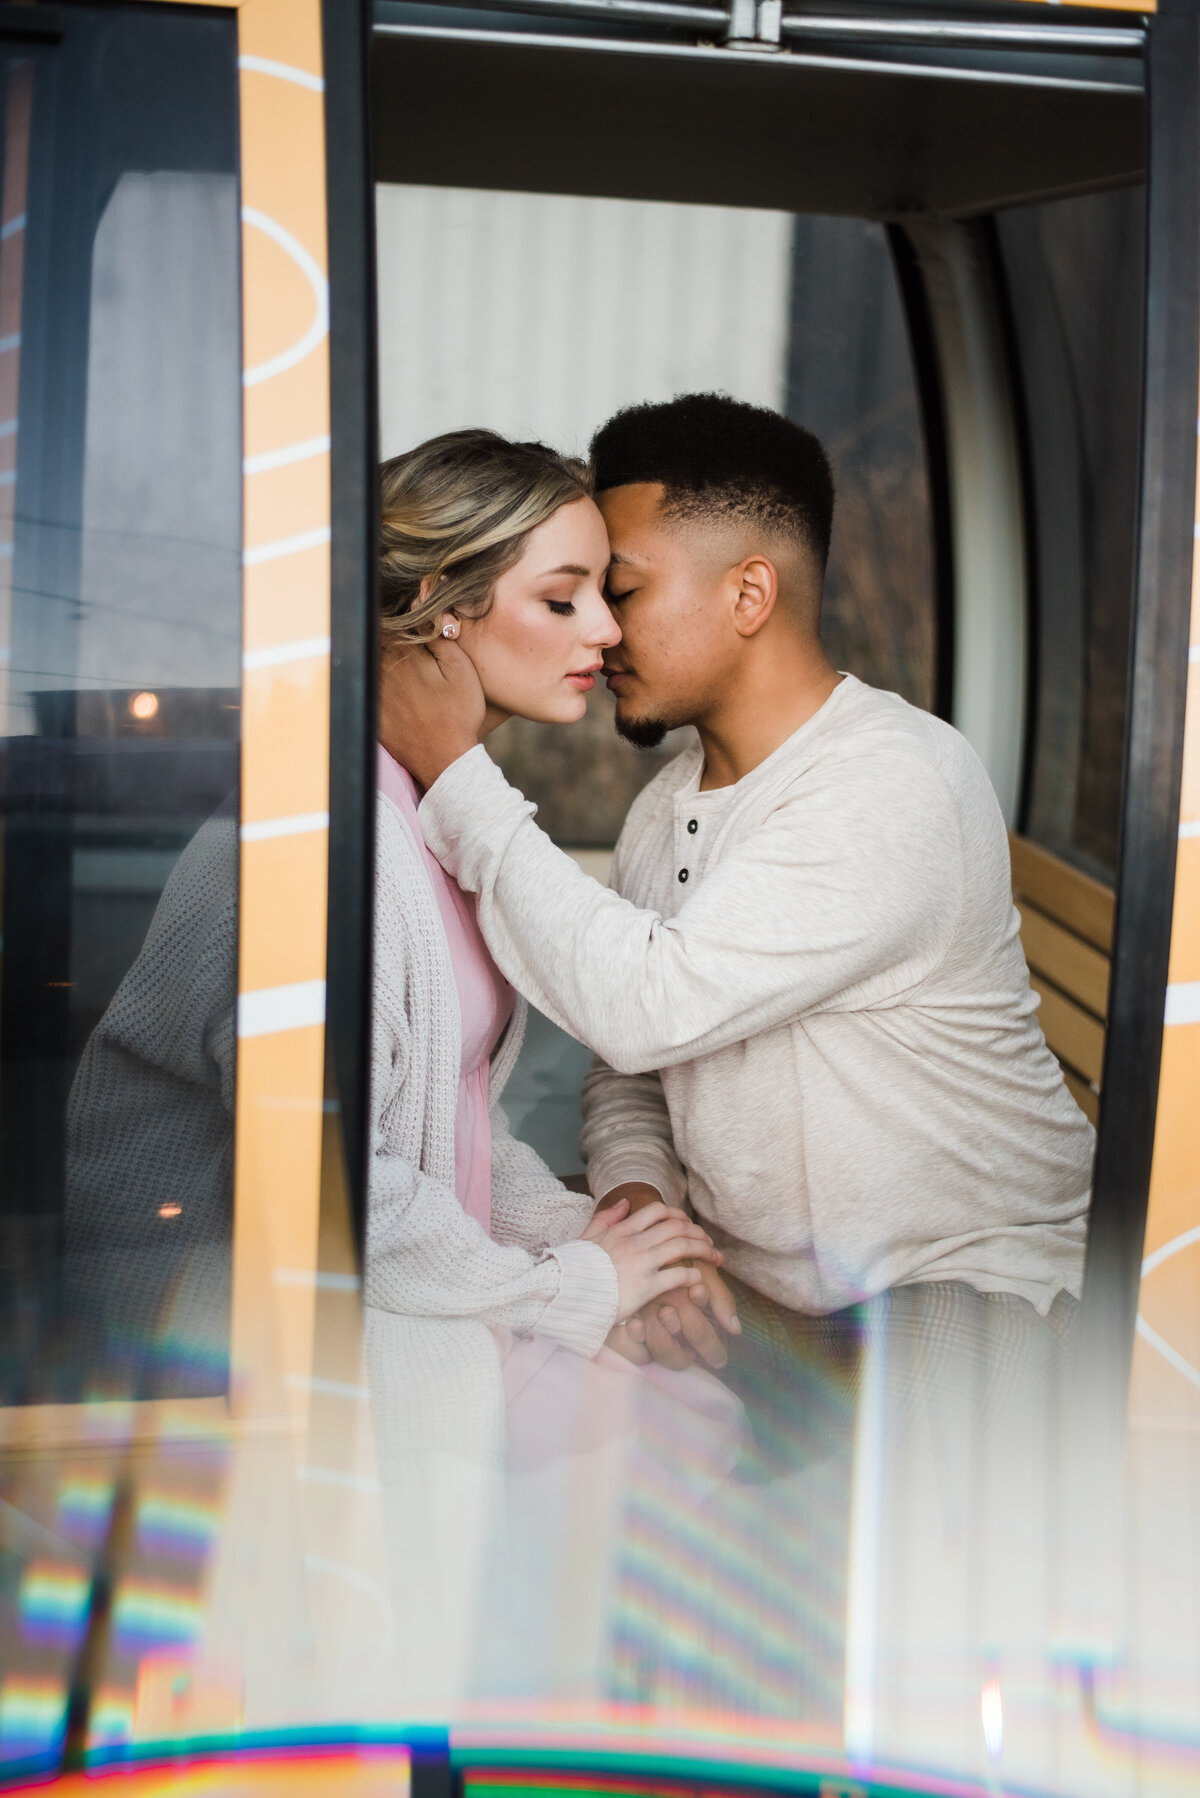 denver couples photography in downtown with man and woman sitting in a trolley cart as the man caresses the woman's jawline and leans in to whisper in her ear romantically captured by denver engagement photographer